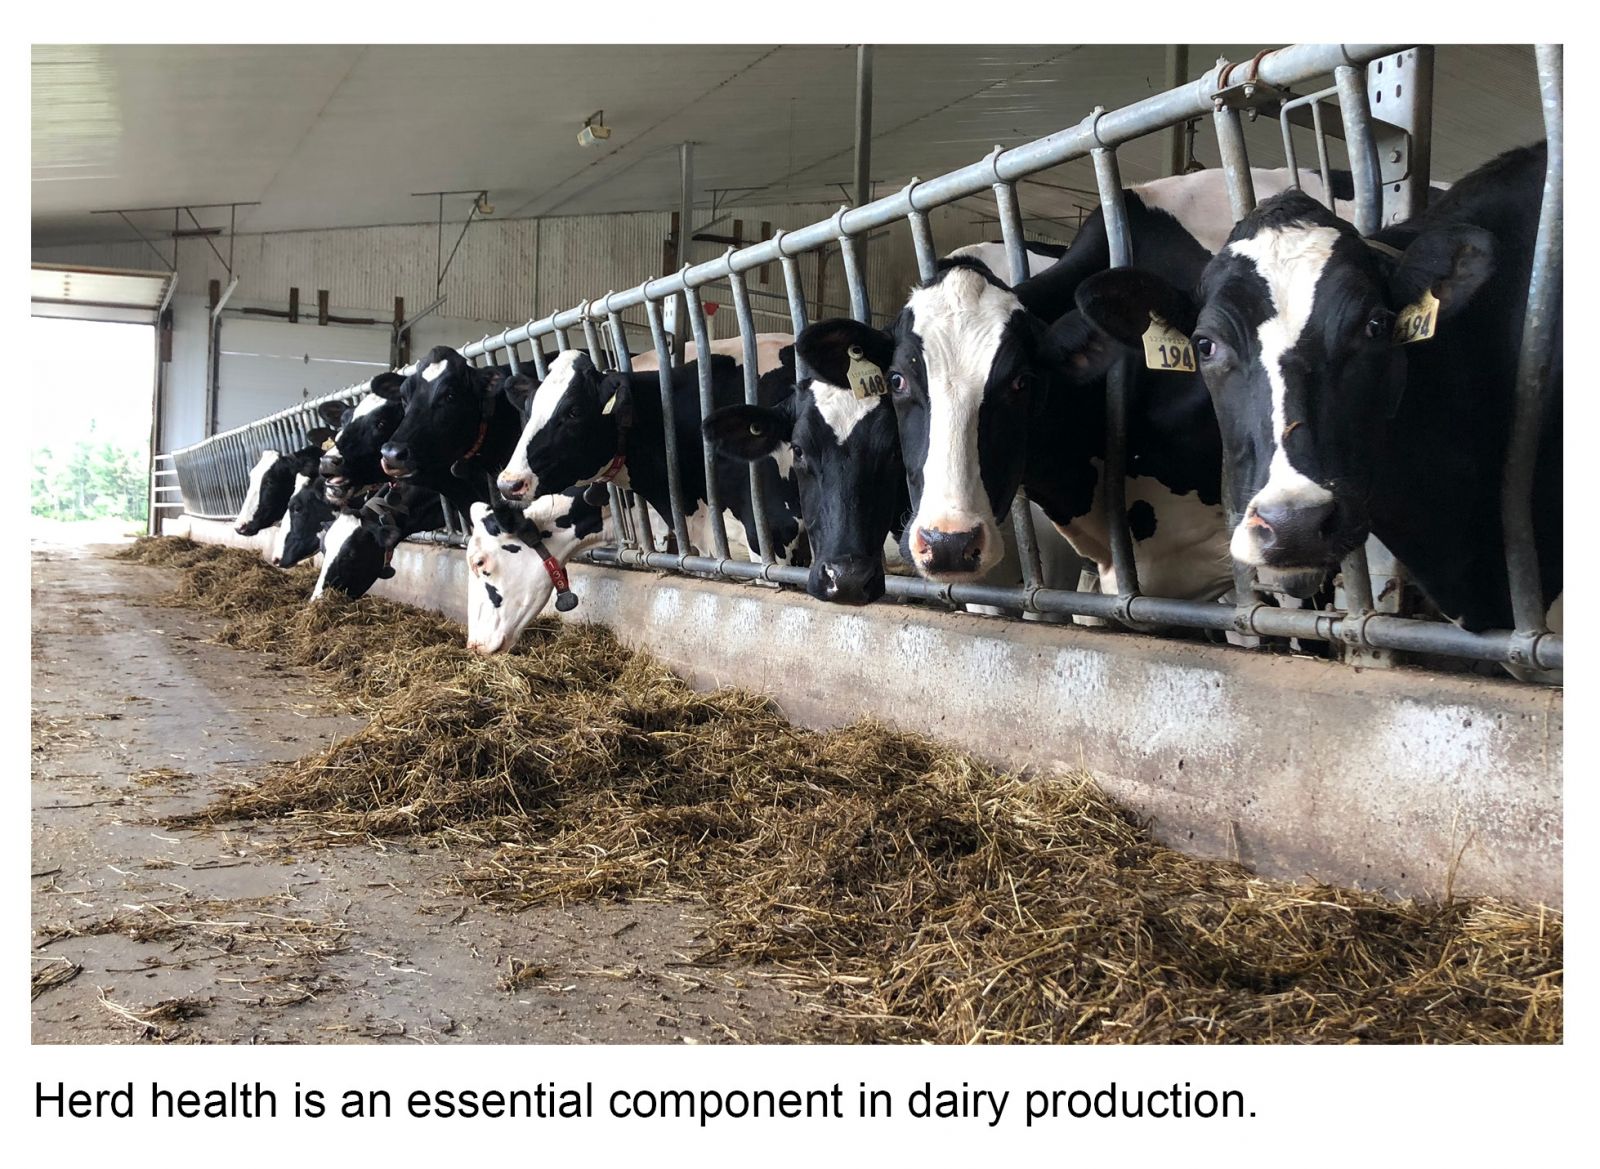 Herd health is an essential component in dairy production.